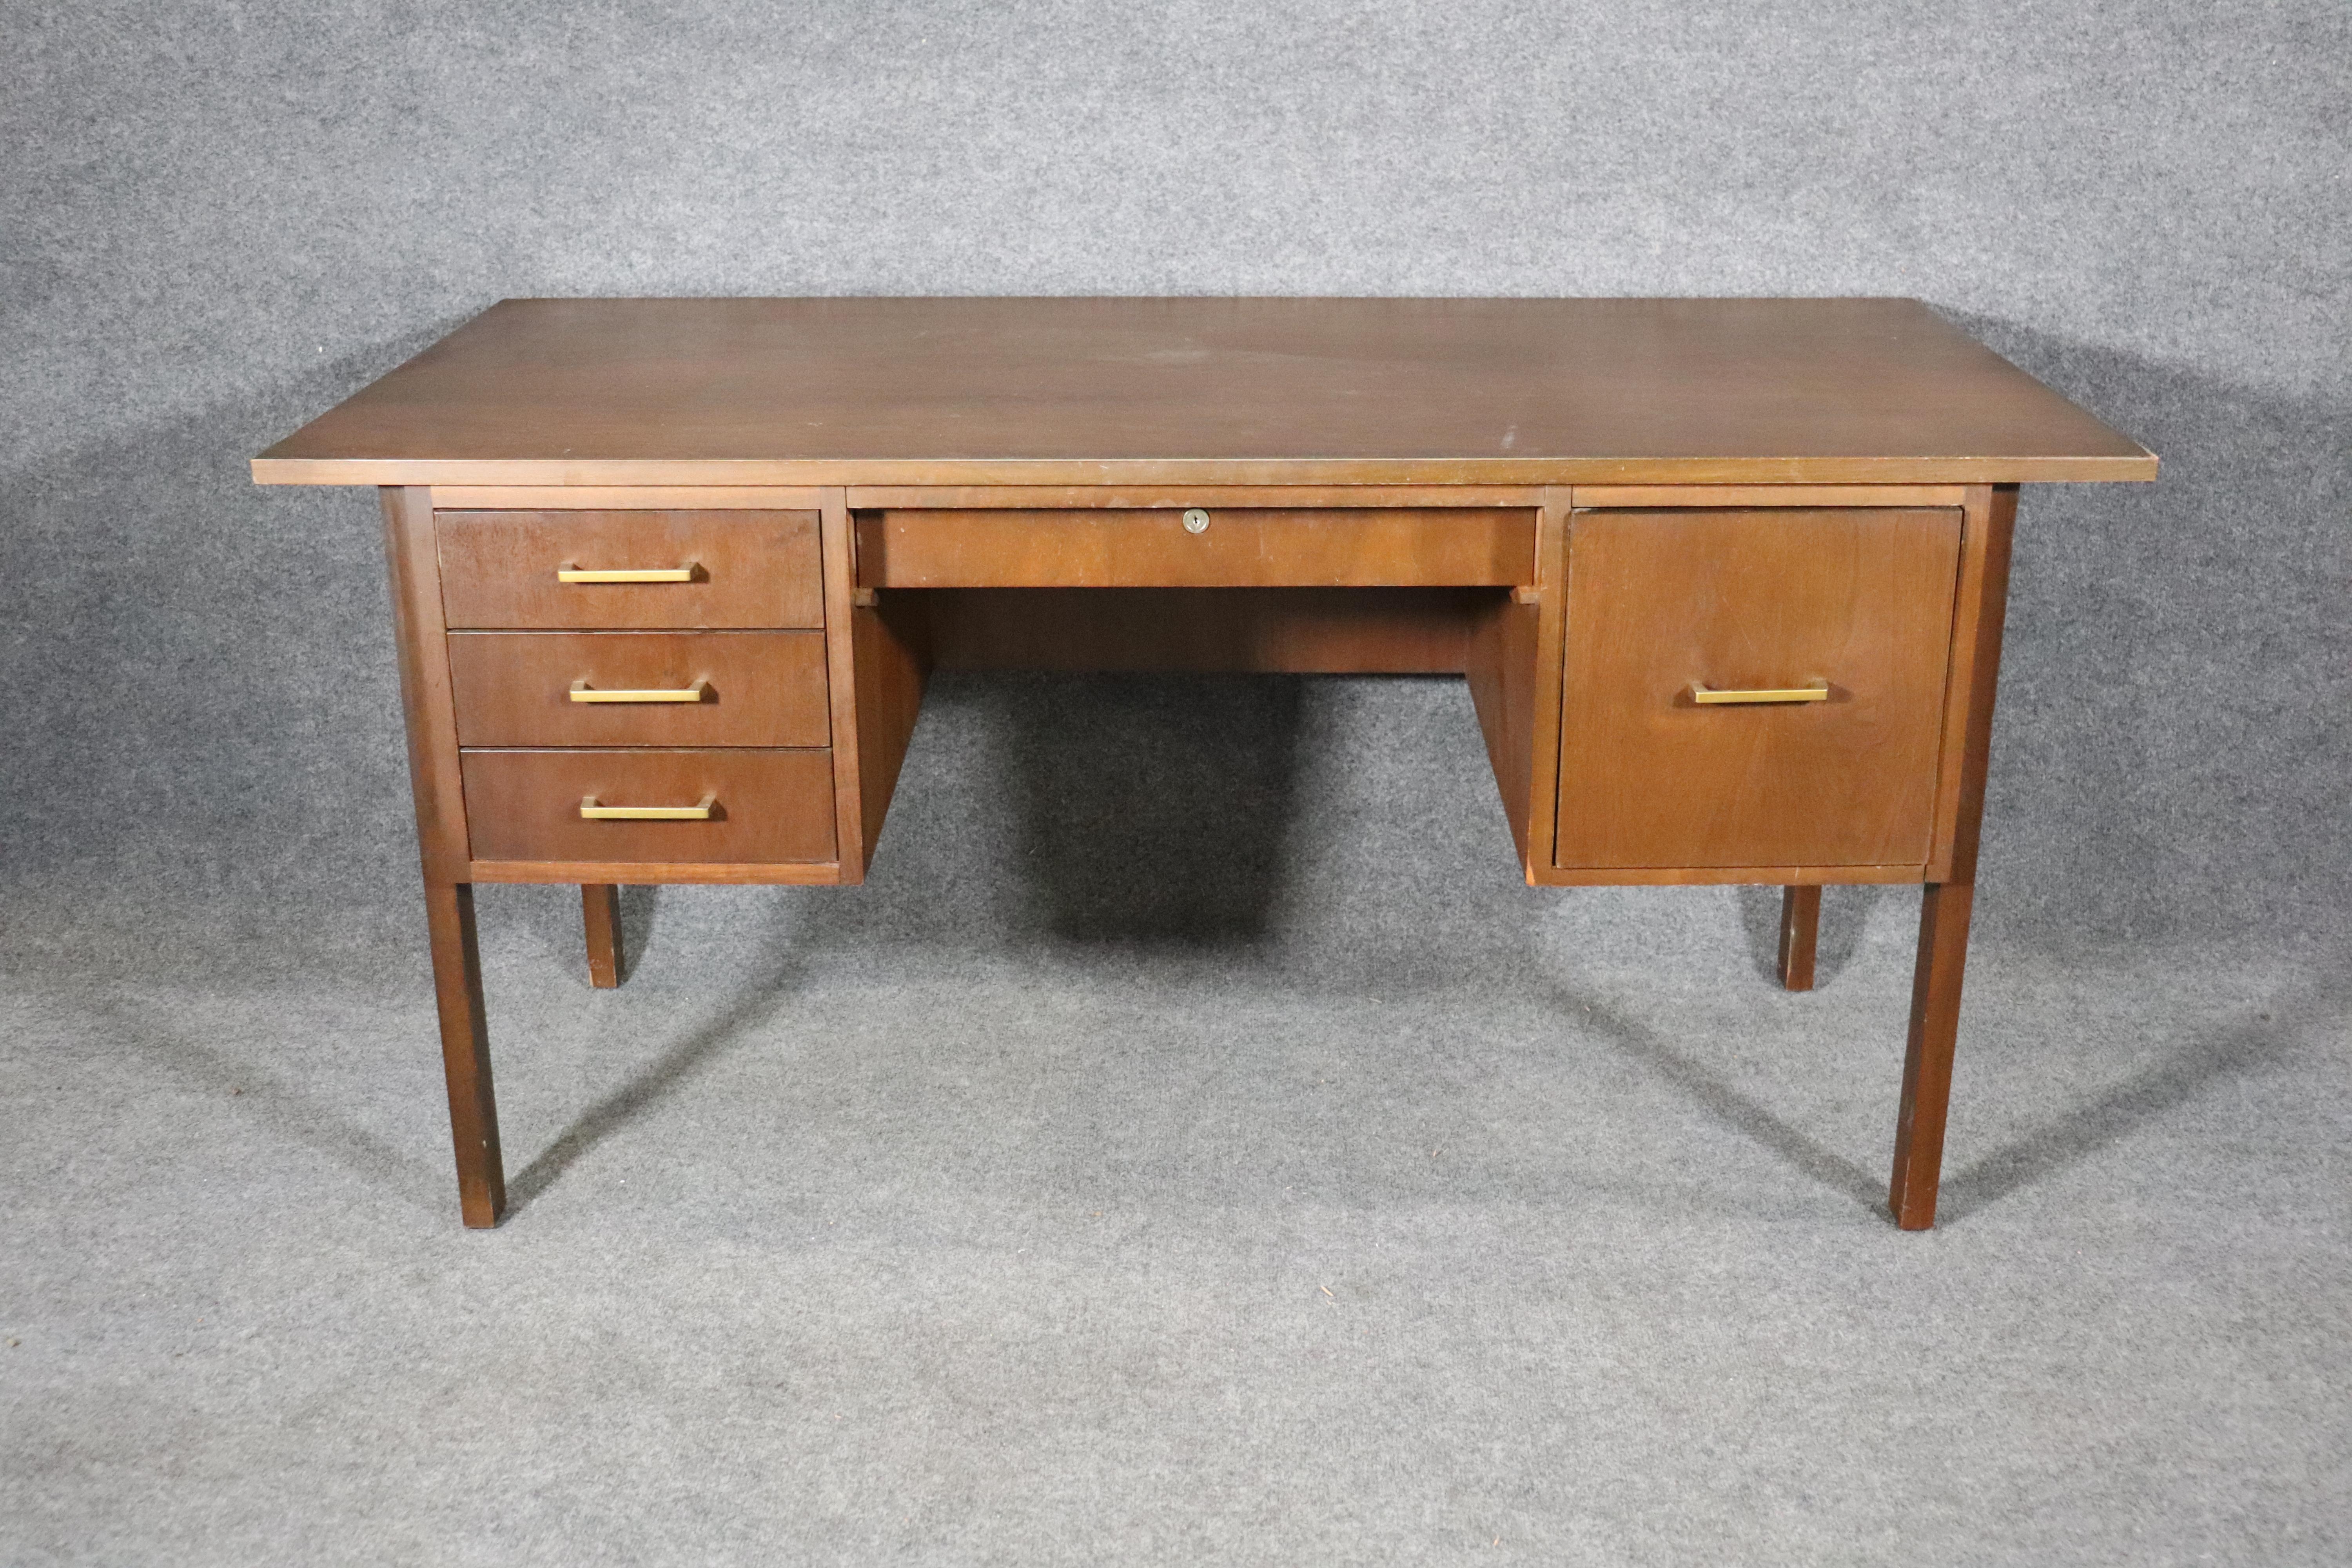 Mid-Century Modern desk made by the Indiana Desk Company. Large walnut desktop and five drawers with brass handles.
Please confirm location NY or NJ.